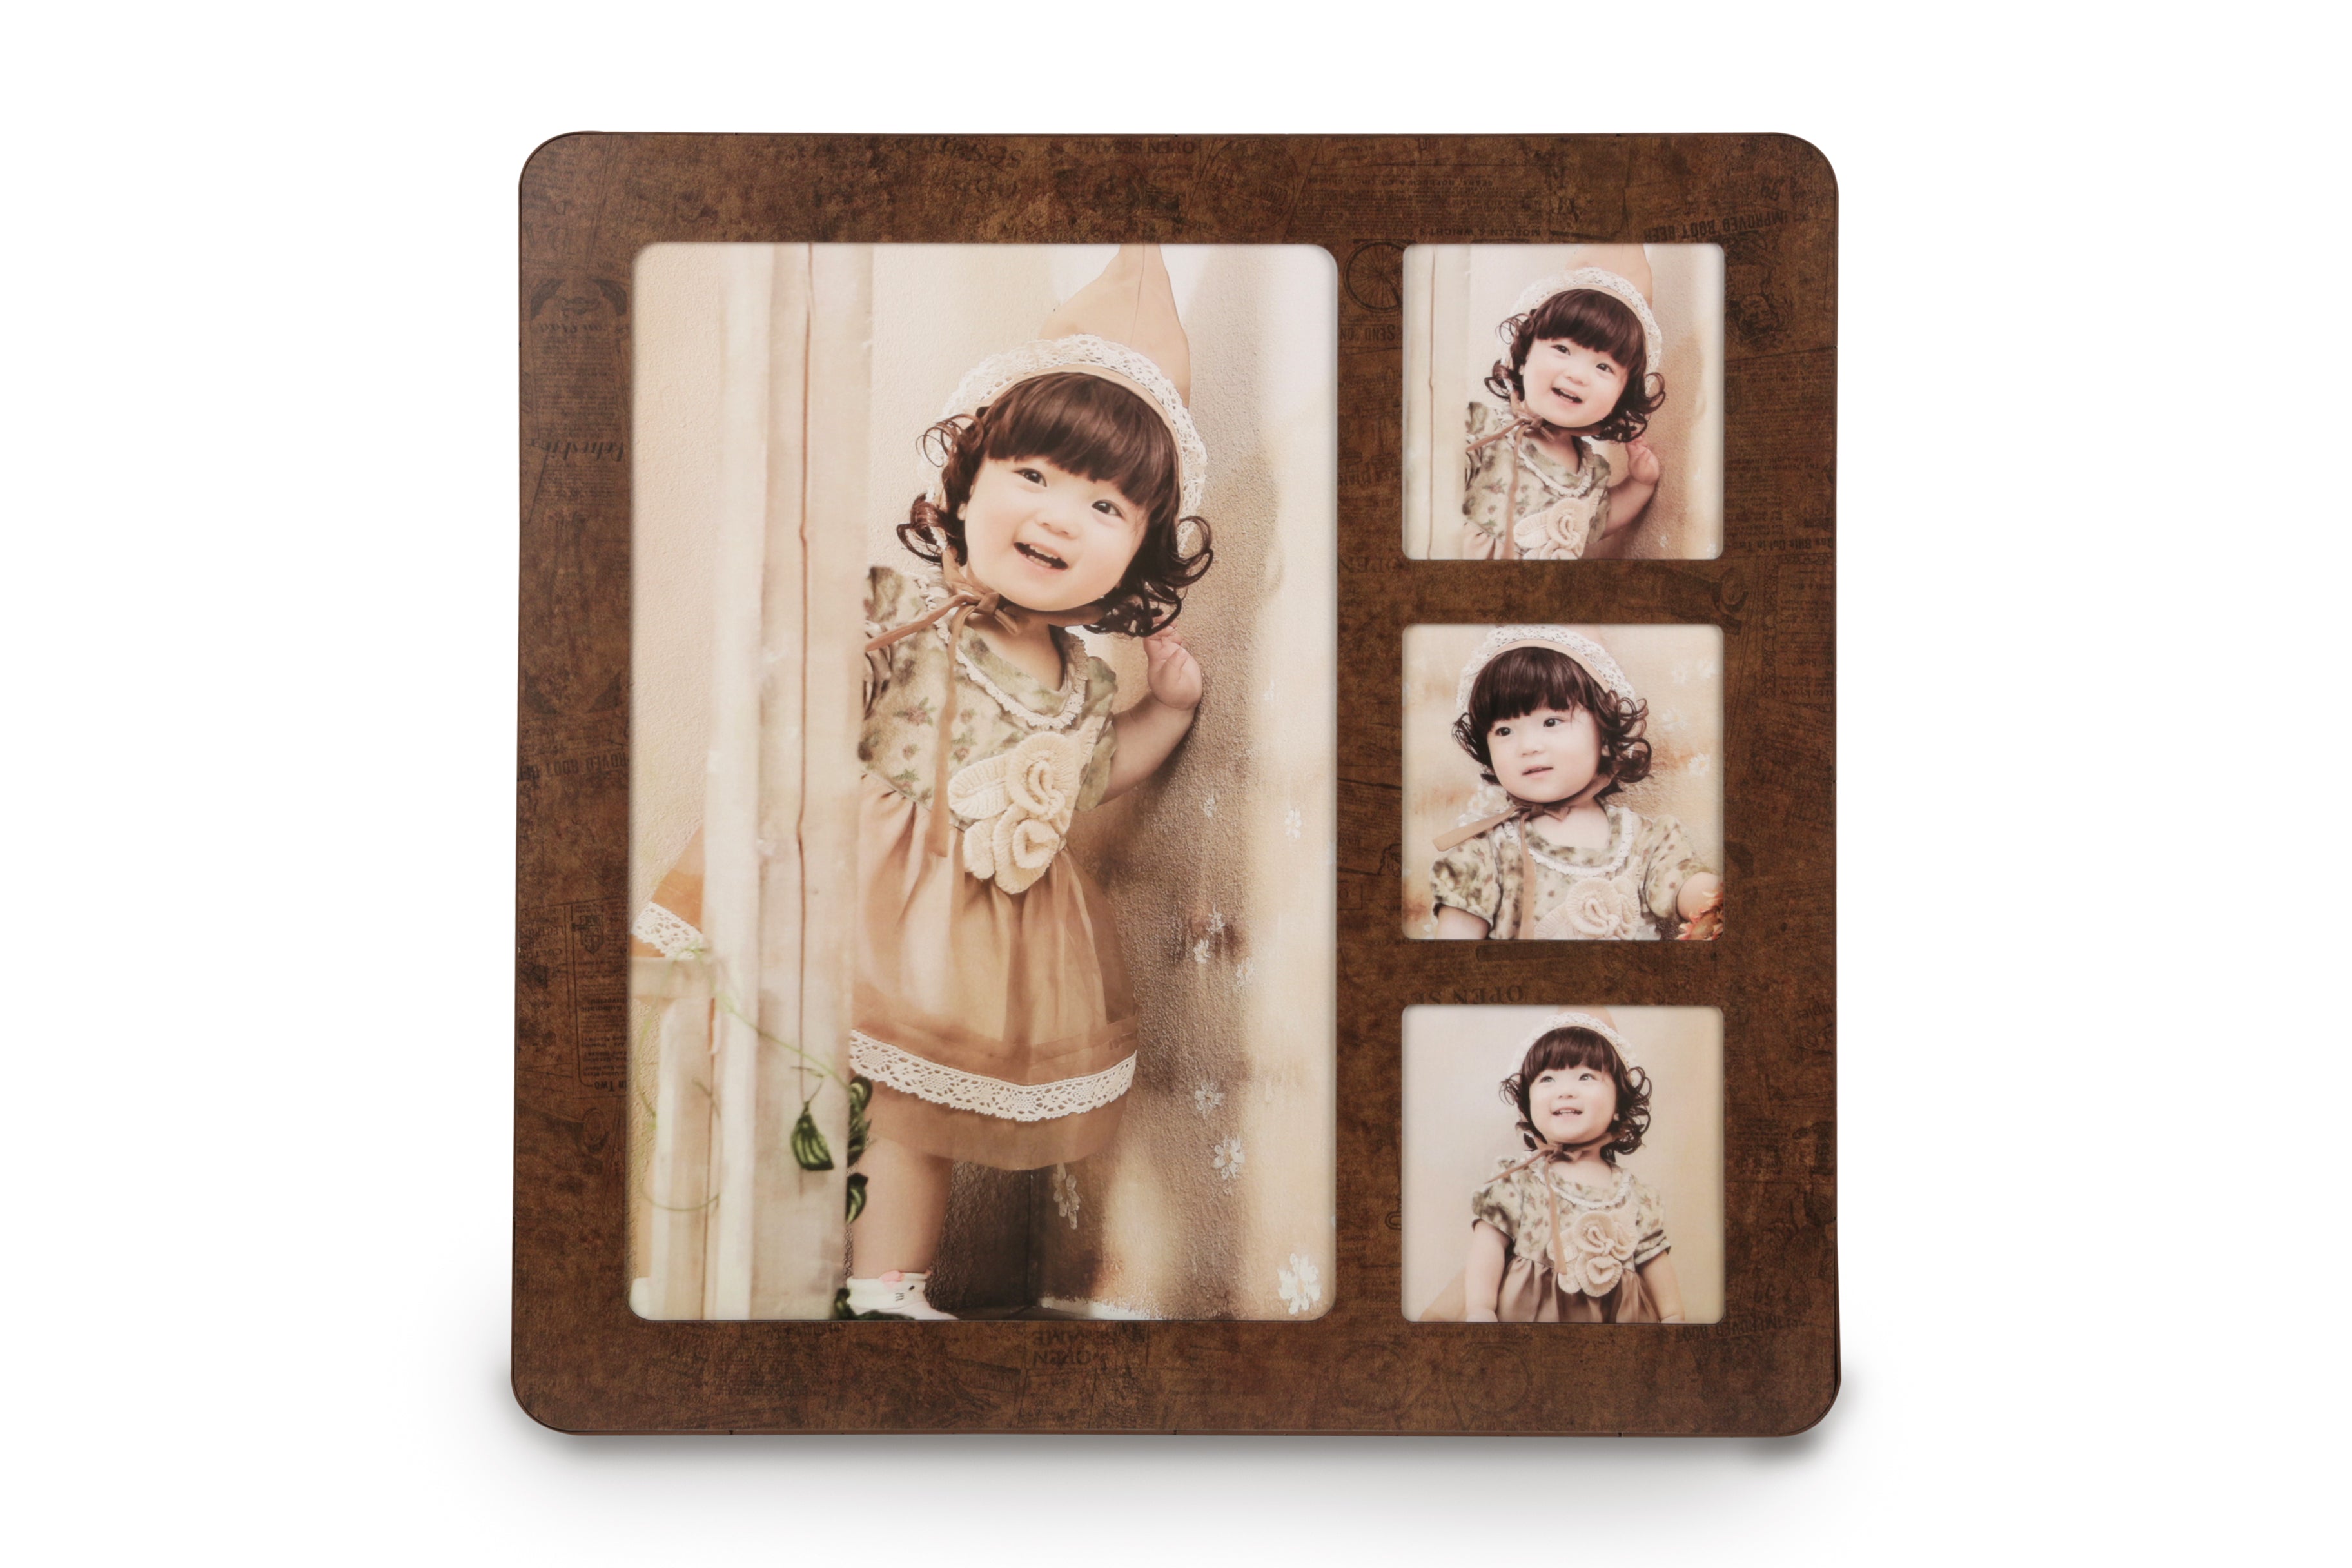 Urbancart® 60 * 60 Table Top Display and Wall mounting Photo Frame, Brown(Holds up to 4 Photos)